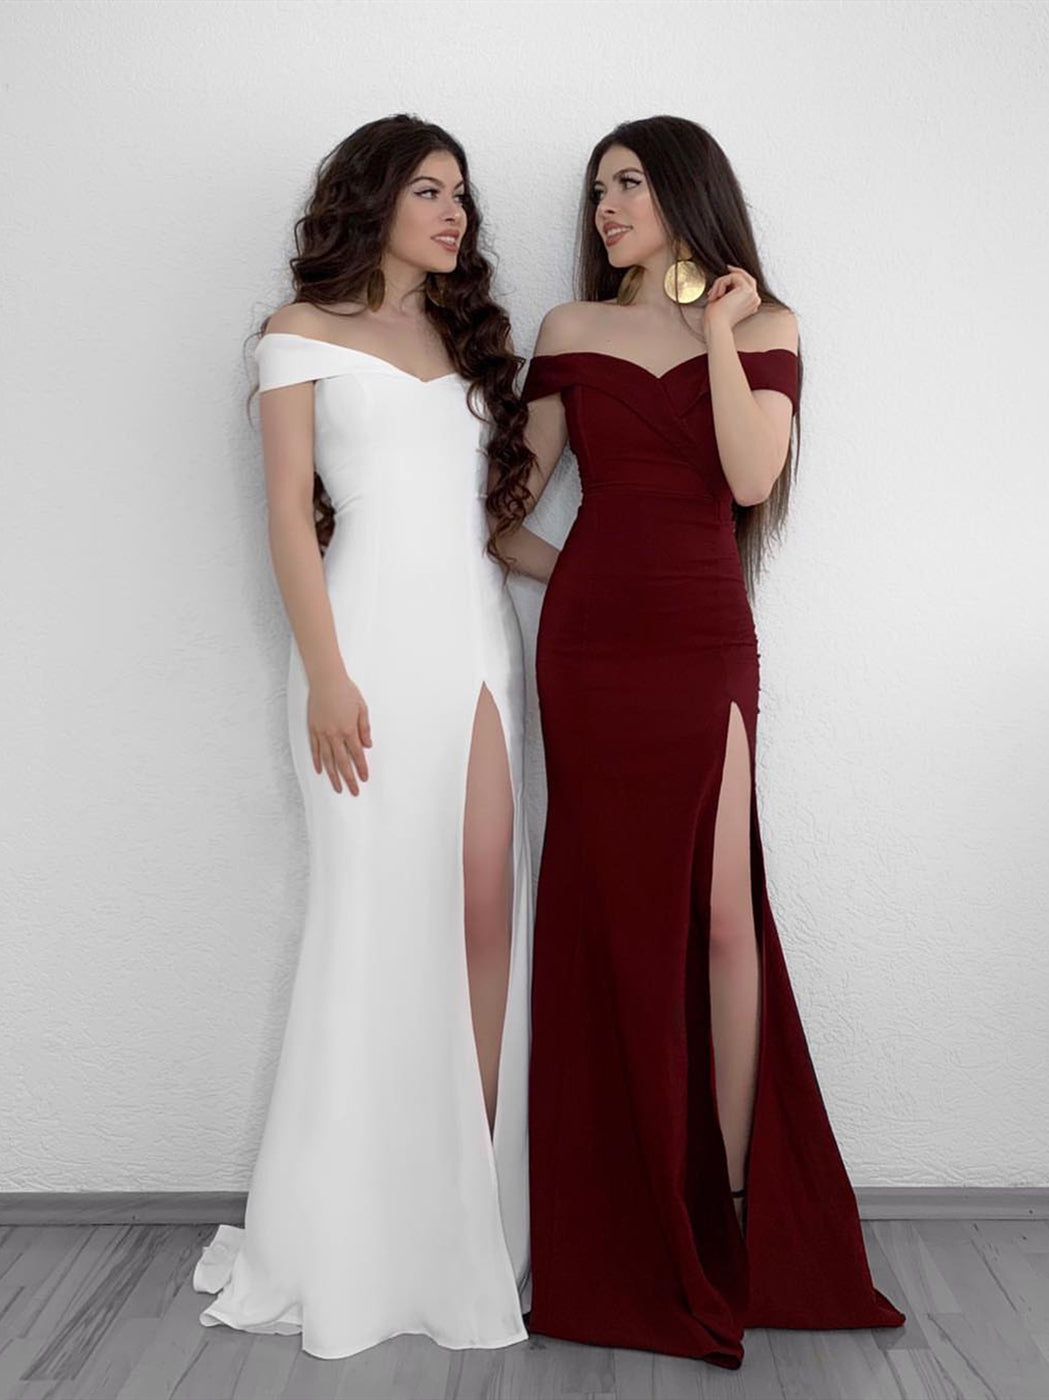 Load image into Gallery viewer, Off Shoulder Mermaid White/Burgundy Prom Dresses with Side High Slit, Off Shoulder White/Burgundy Bridesmaid Dresses, Graduation Dresses
